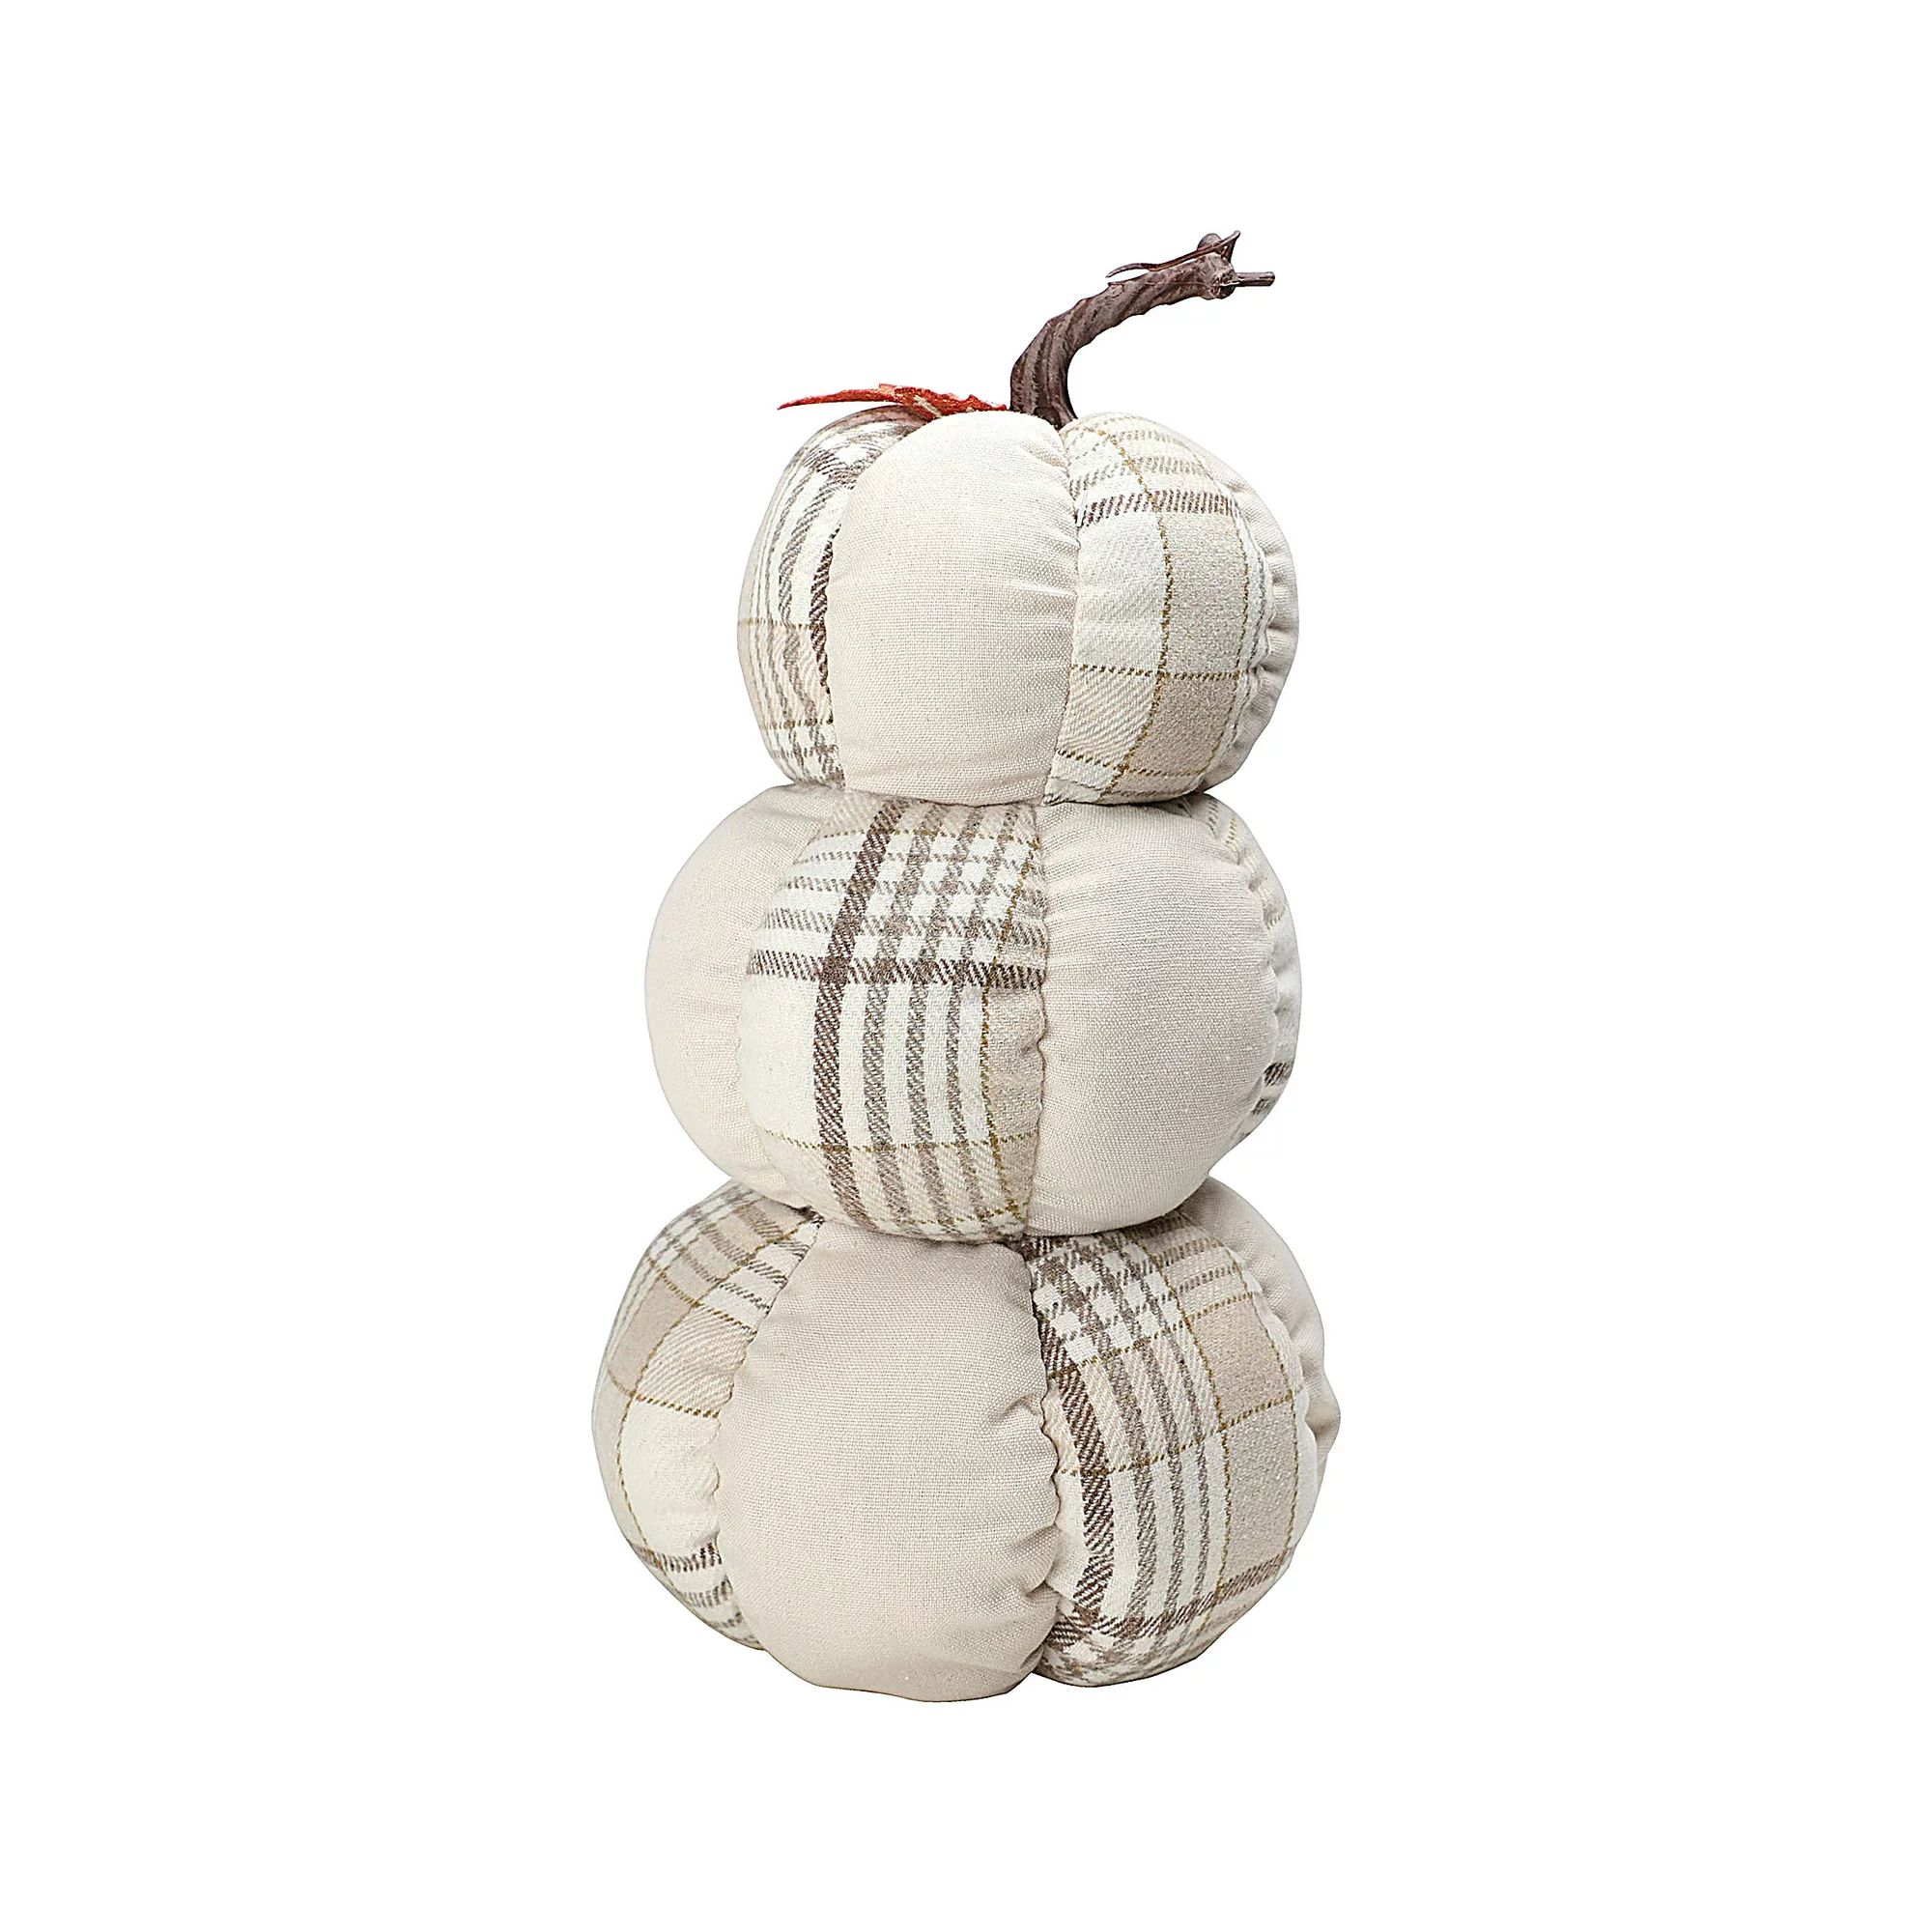 Way To Celebrate Stacked Fabric Plaid Pumpkins, Harvest Décor; 13" Tall | Walmart (US)